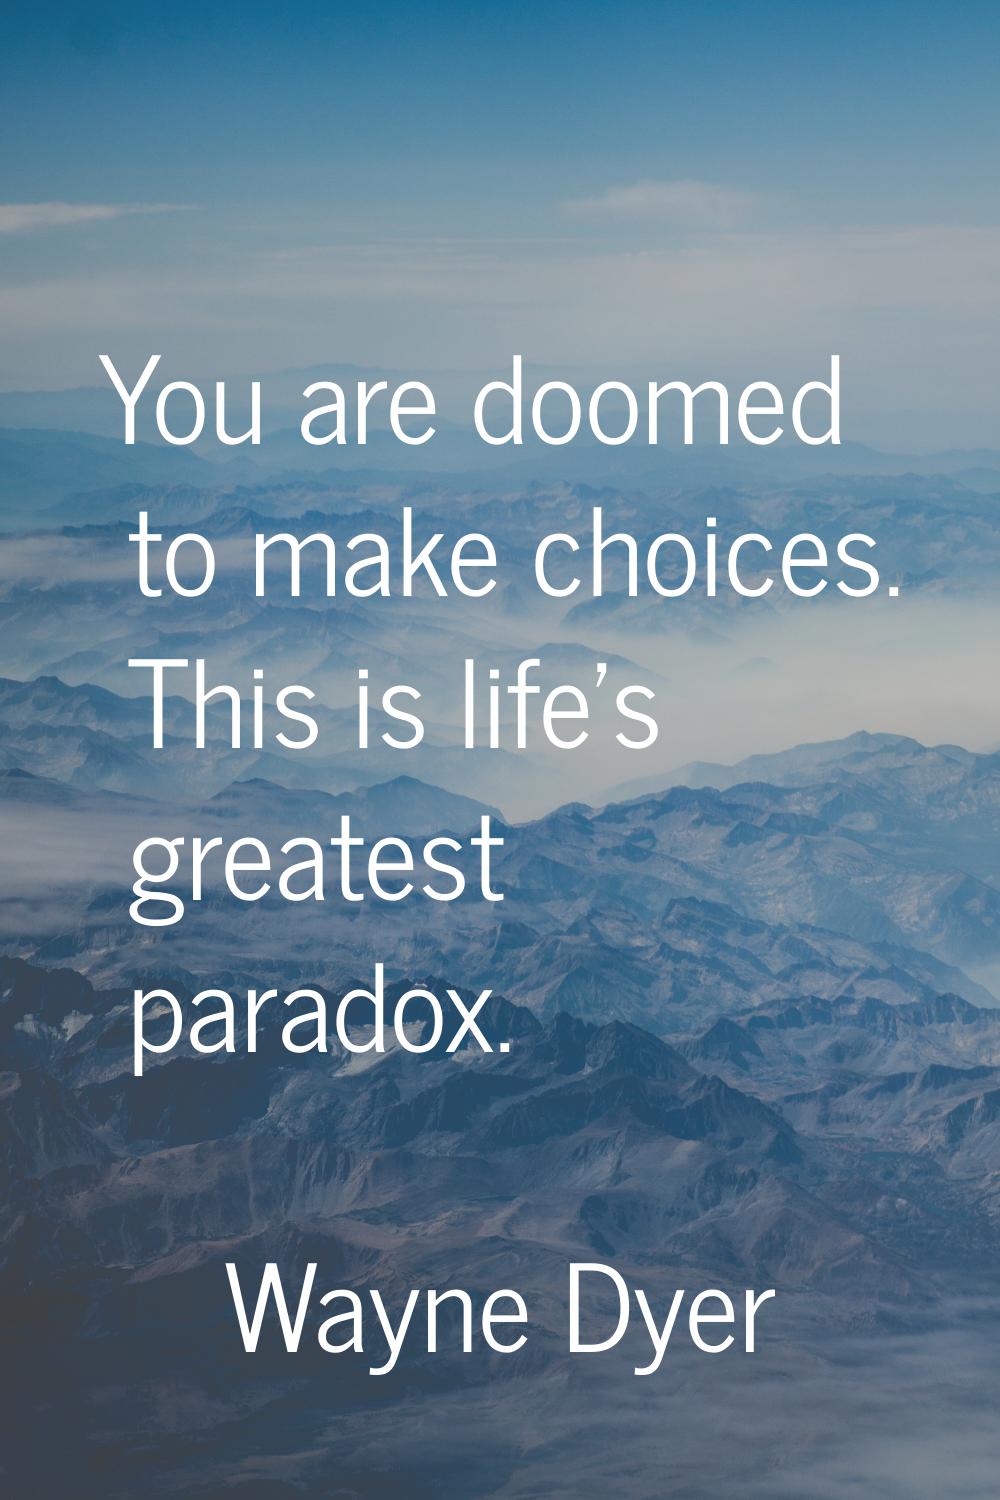 You are doomed to make choices. This is life's greatest paradox.